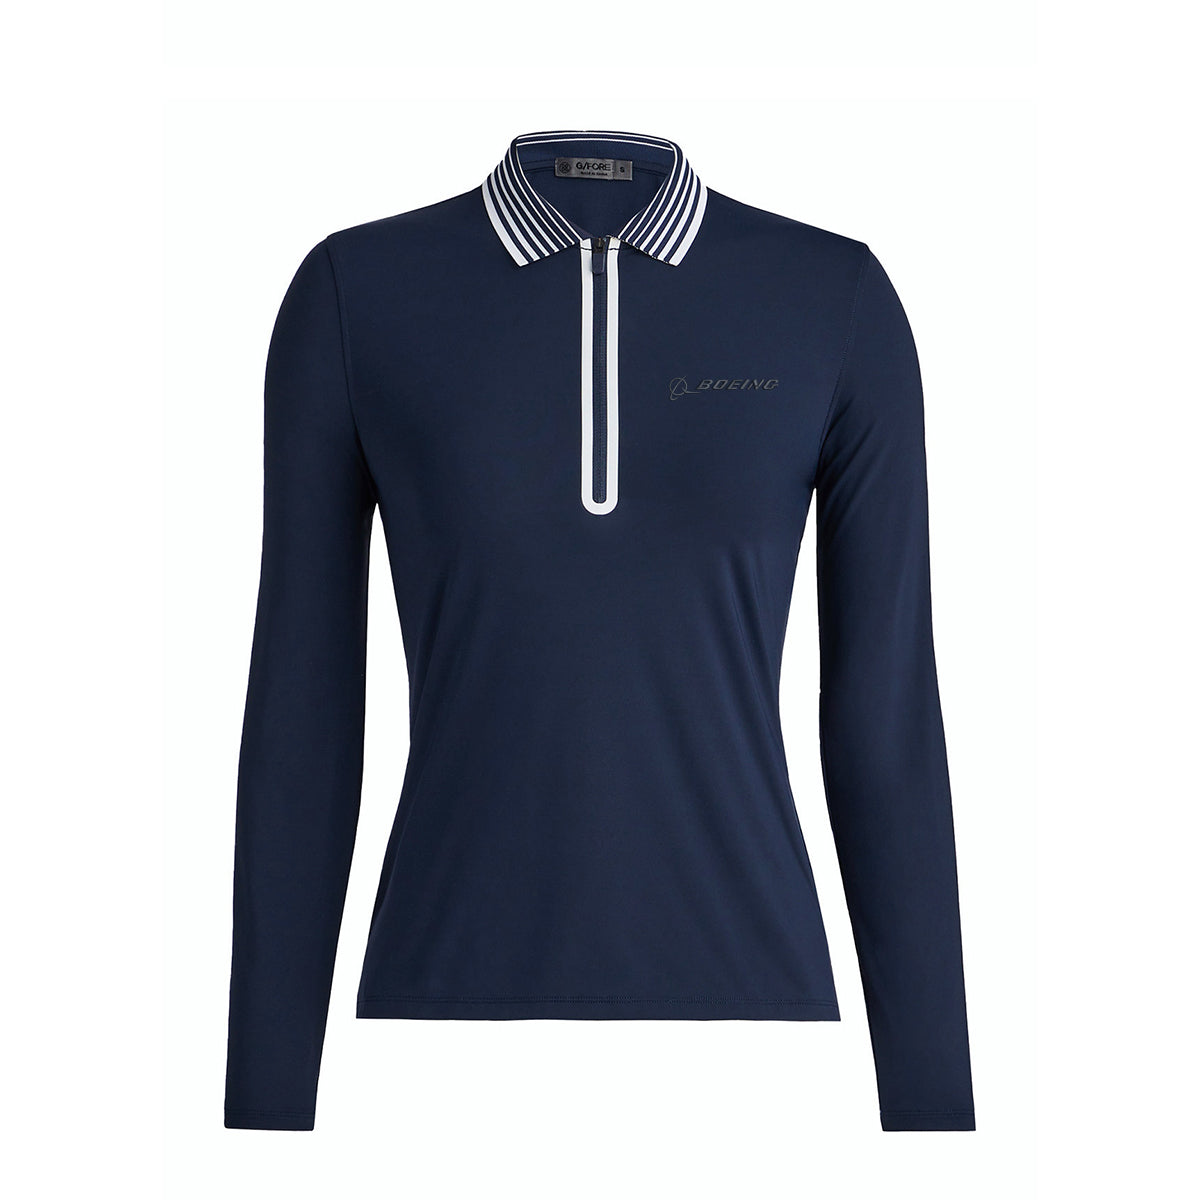 Full product image on a women's mannequin. Features a quarter-zip and Boeing logo on left chest. Long sleeve quarter zip polo in navy with white stripes on the collar